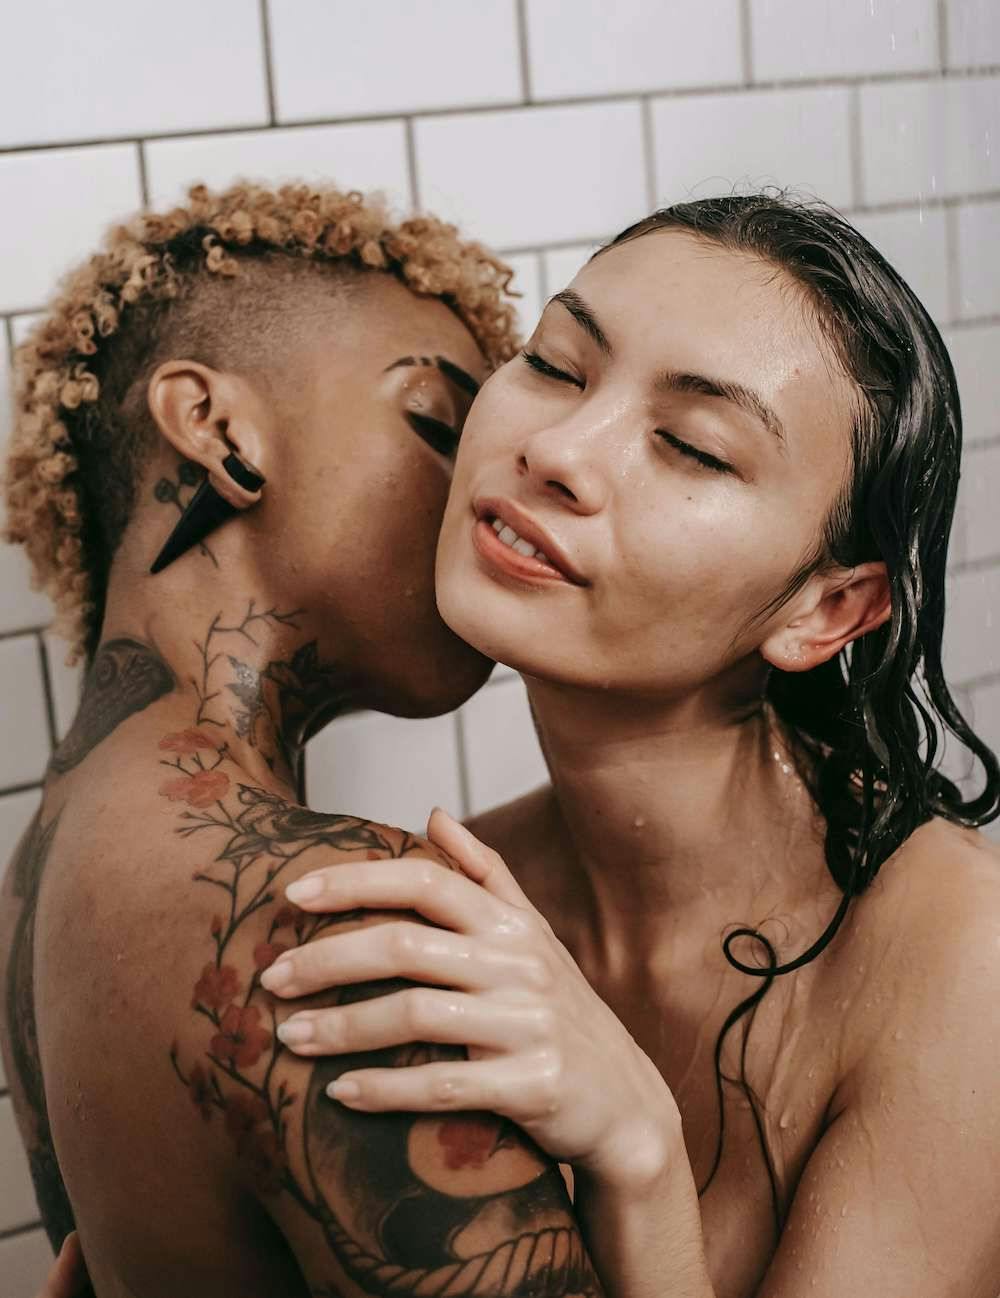 Featured for Embracing Sexual Diversity: Not Everyone Has Sex The Same Way